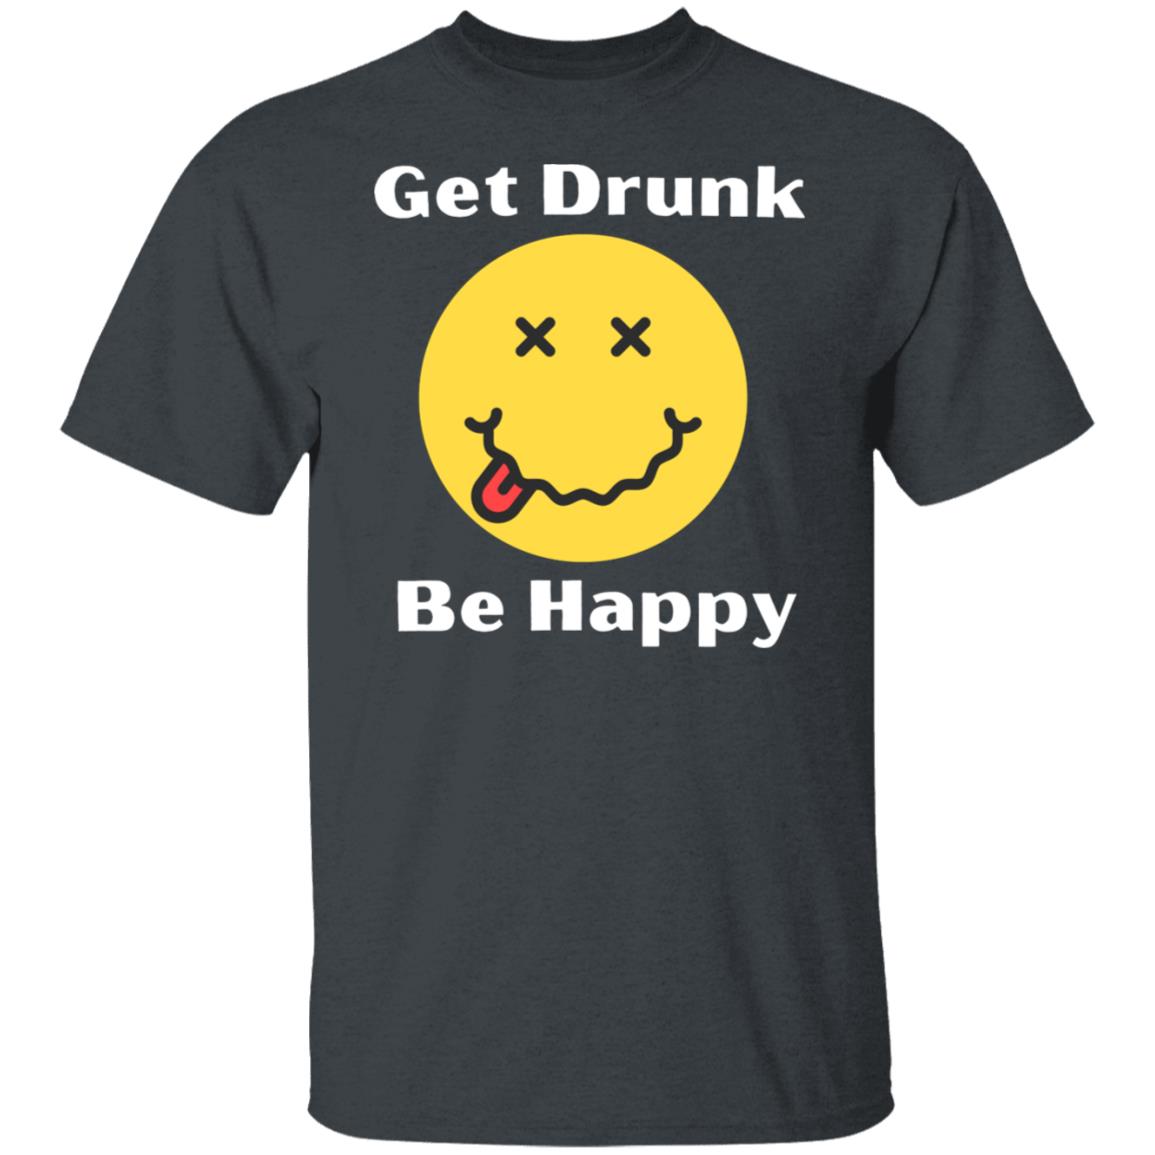 Get Drunk Be Happy Beer Lover Weekend Party Smiley Face Drunk Shirt Graphic Tee T-Shirt